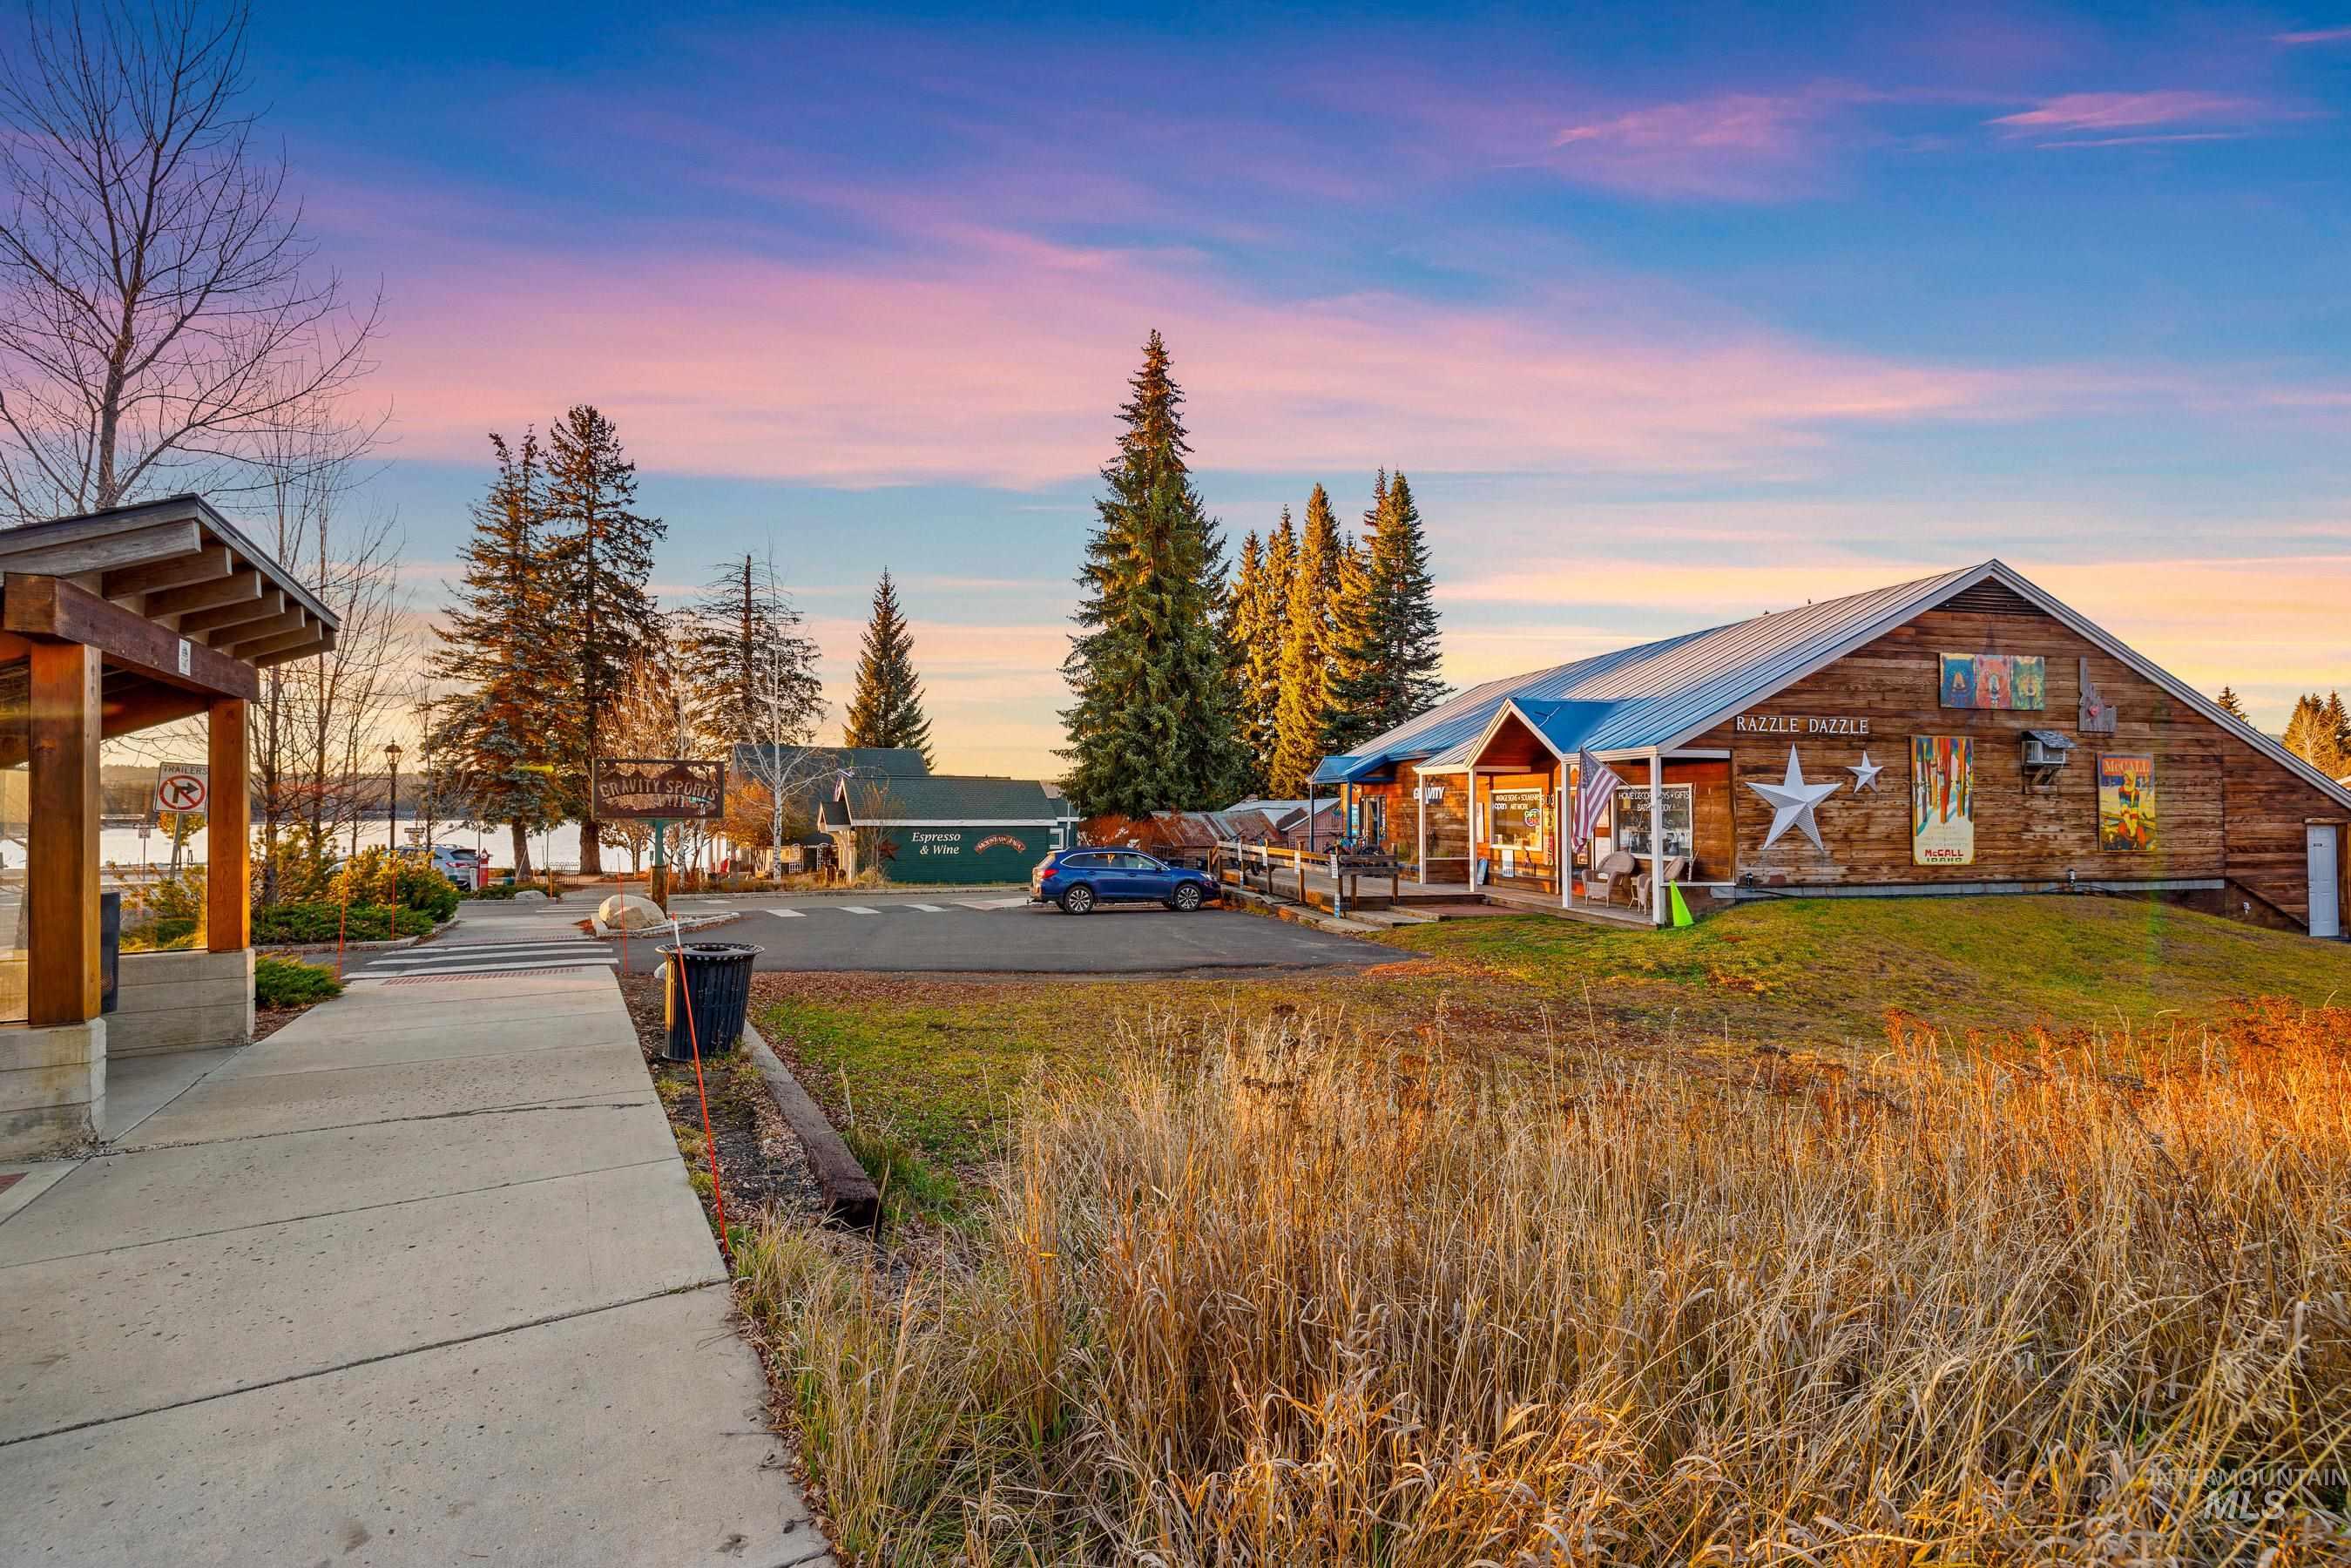 503 Pine Street, McCall, Idaho 83638, Business/Commercial For Sale, Price $1,650,000,MLS 98916089